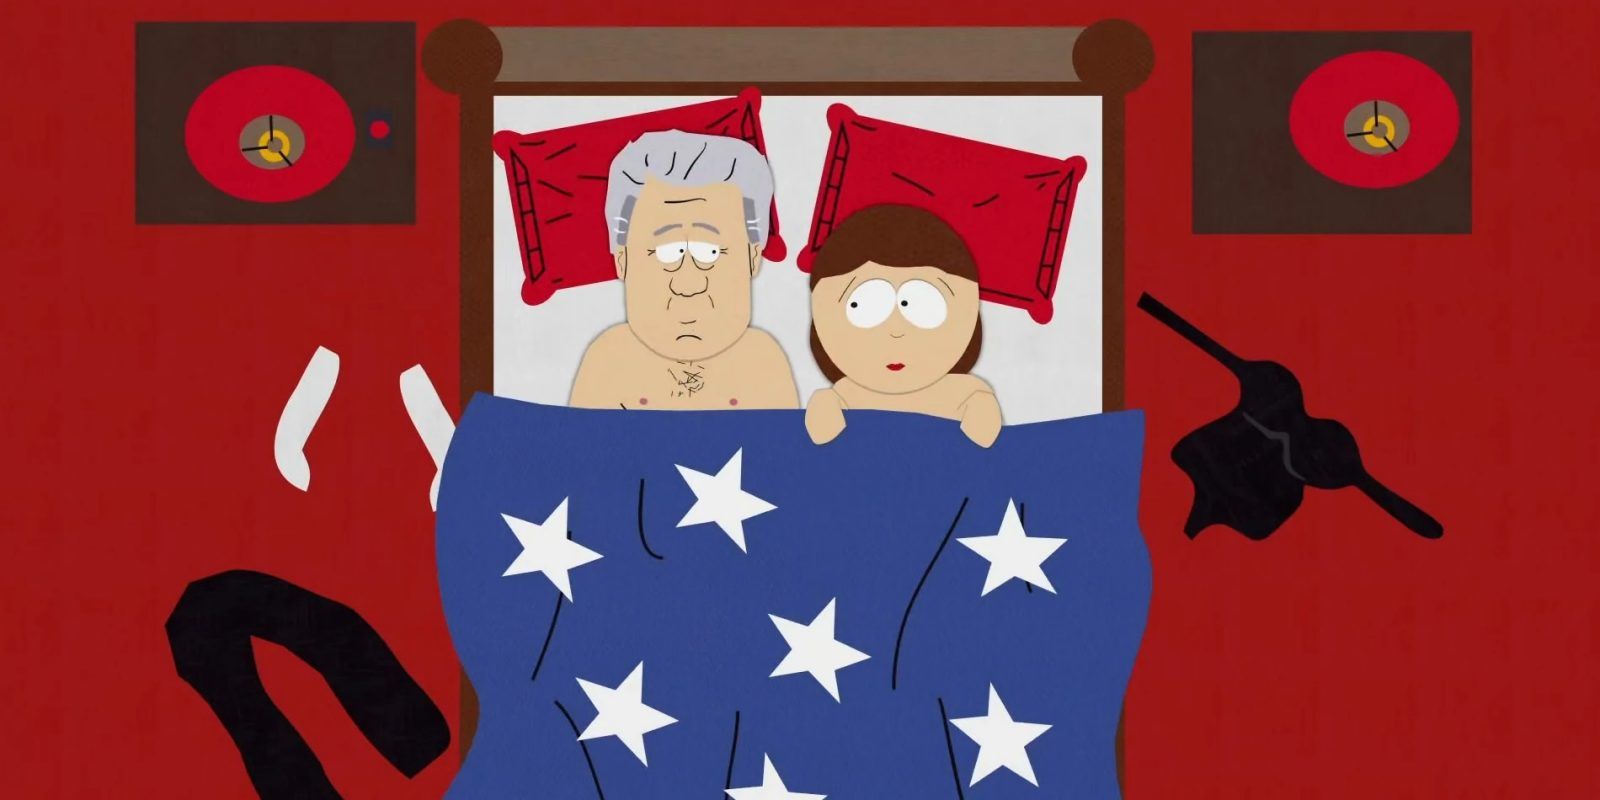 Cartman's mom under a blanket with a man, surrounded by clothes in South Park.